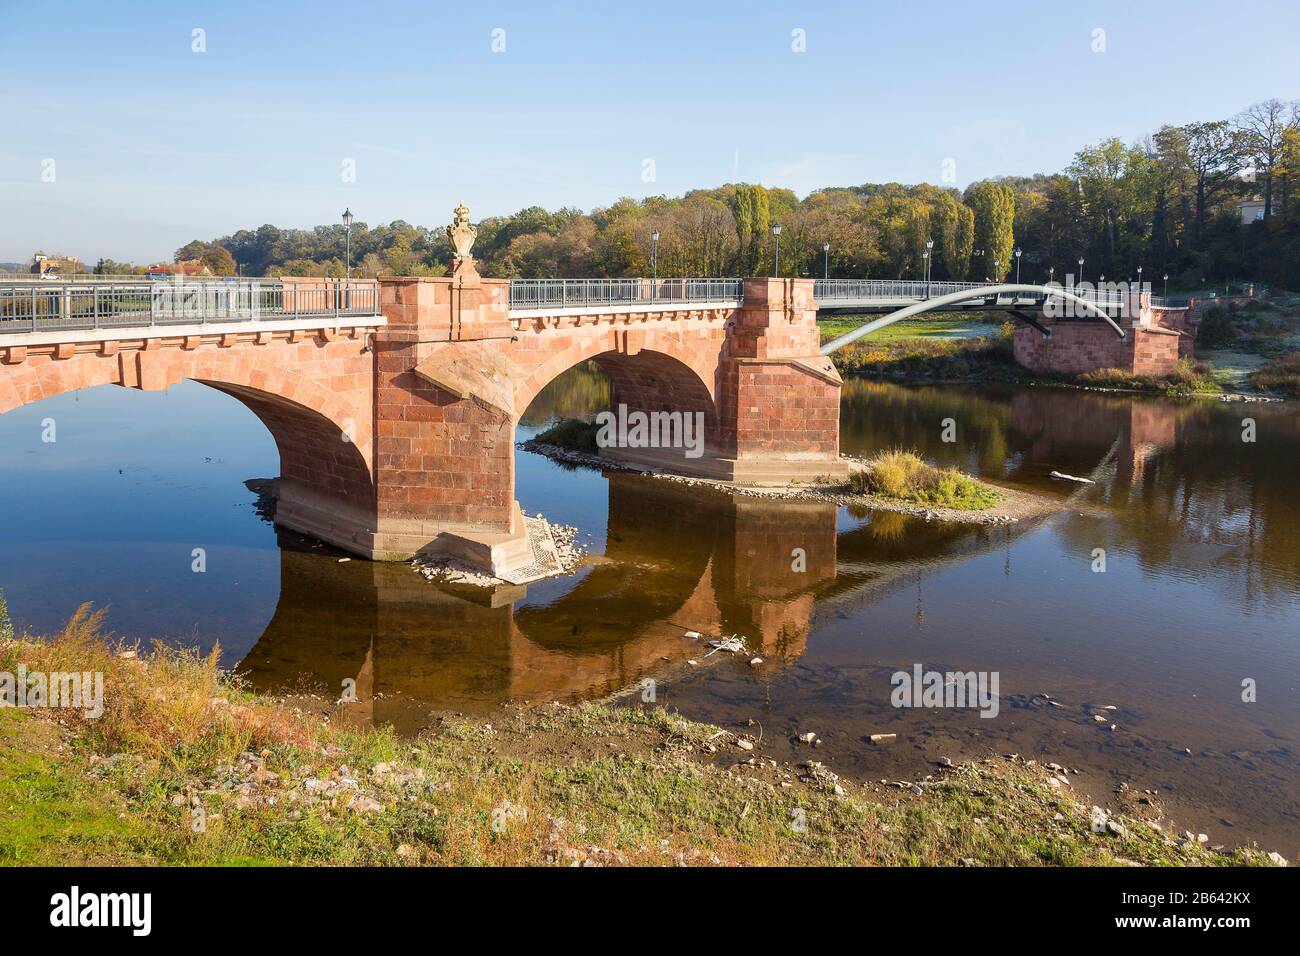 Poeppelmann Bridge over the Mulde River, Grimma, Saxony, Germany Stock Photo